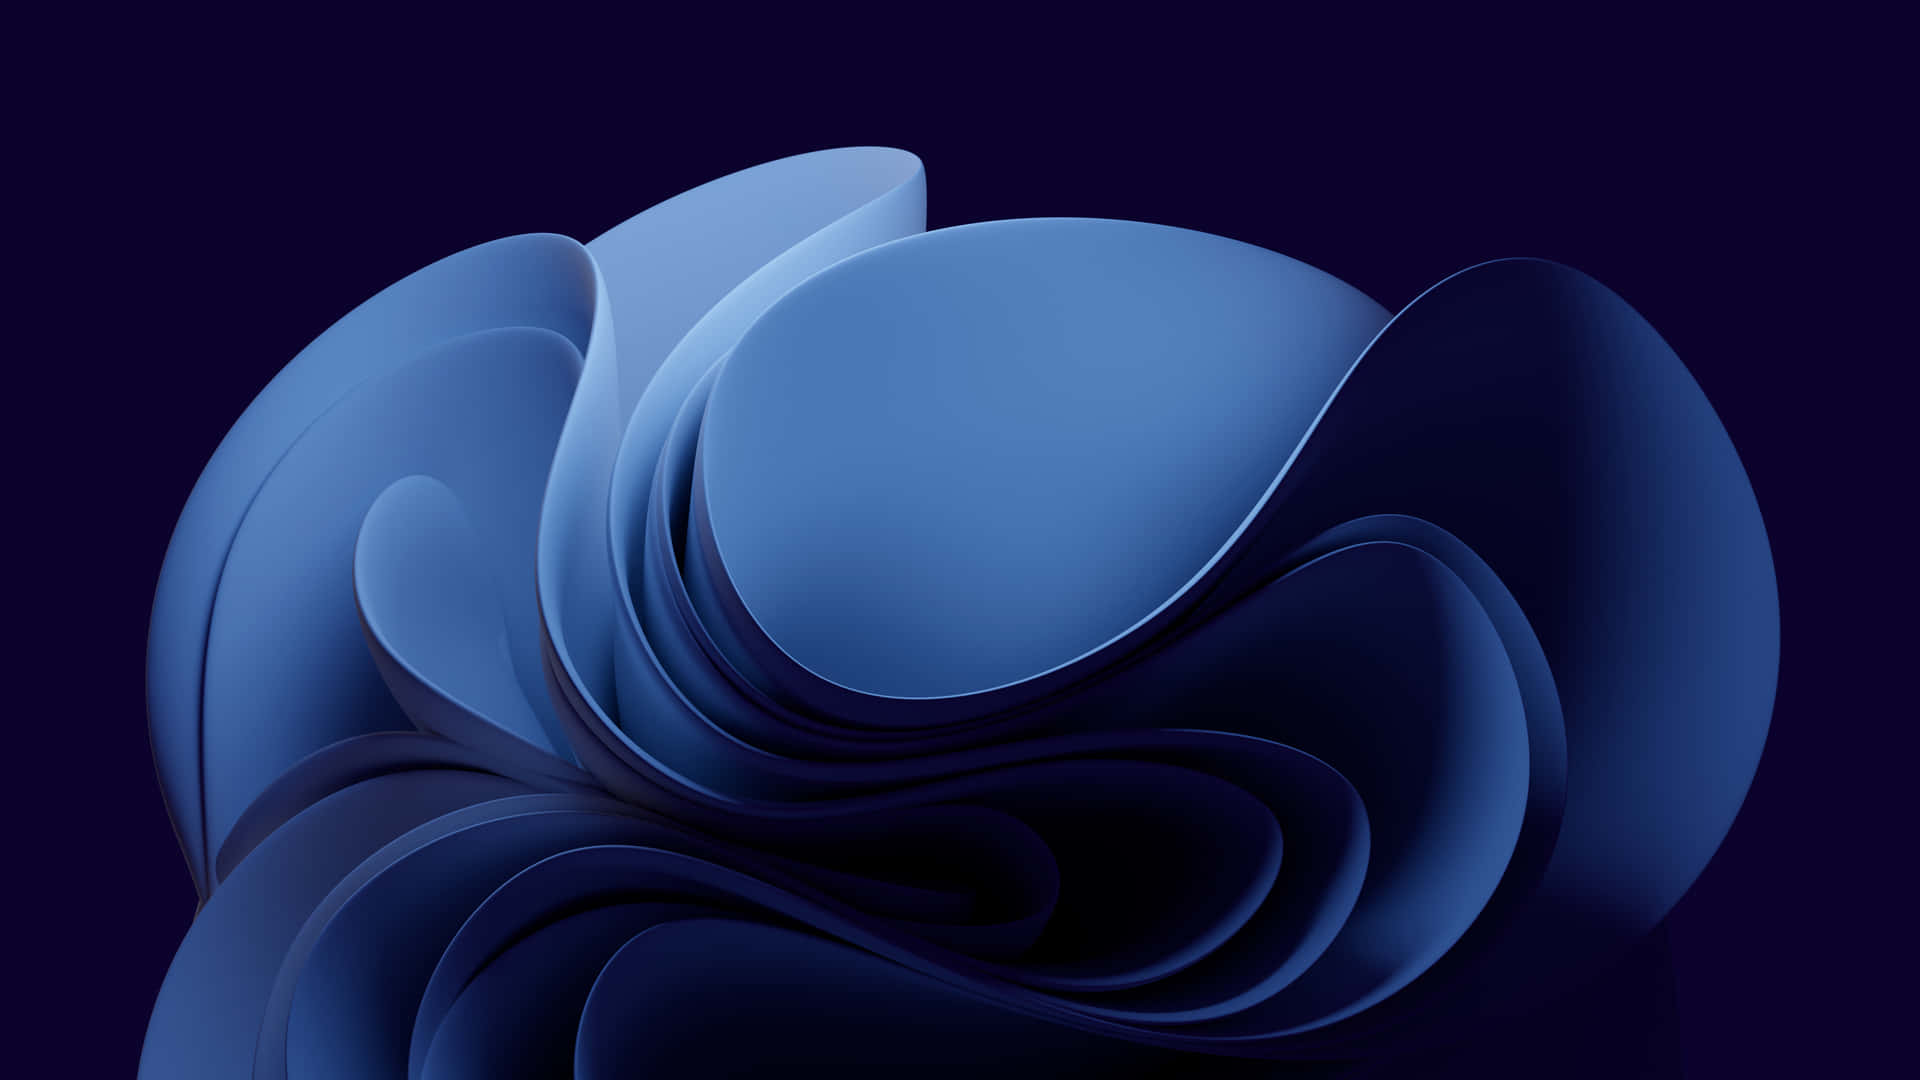 navy blue abstract background